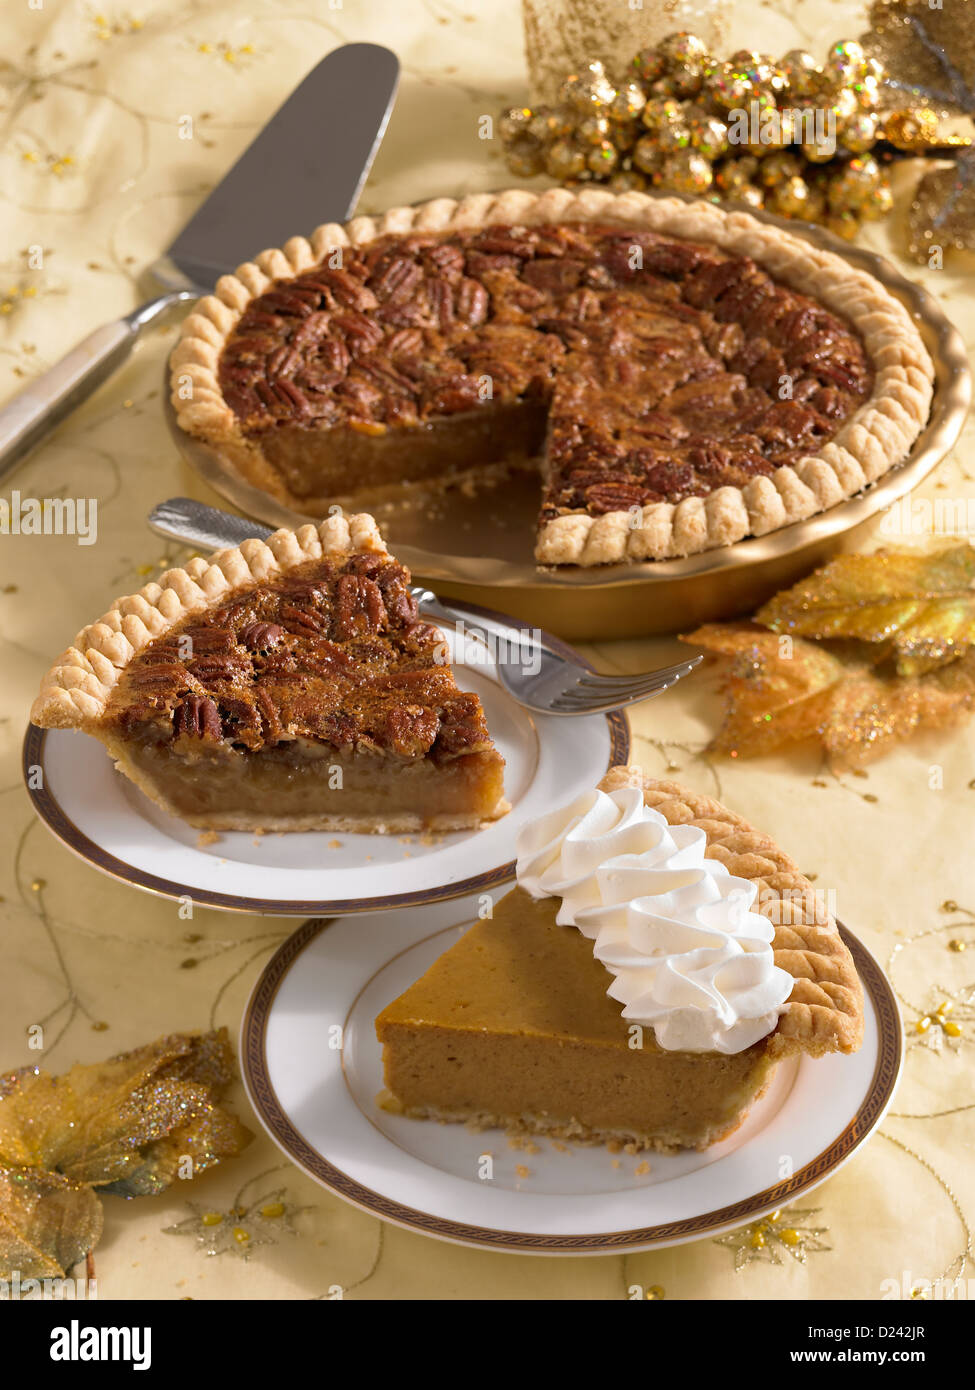 Pecan and pumpkin pie slice with a whole pecan pie if a festive holiday setting Stock Photo